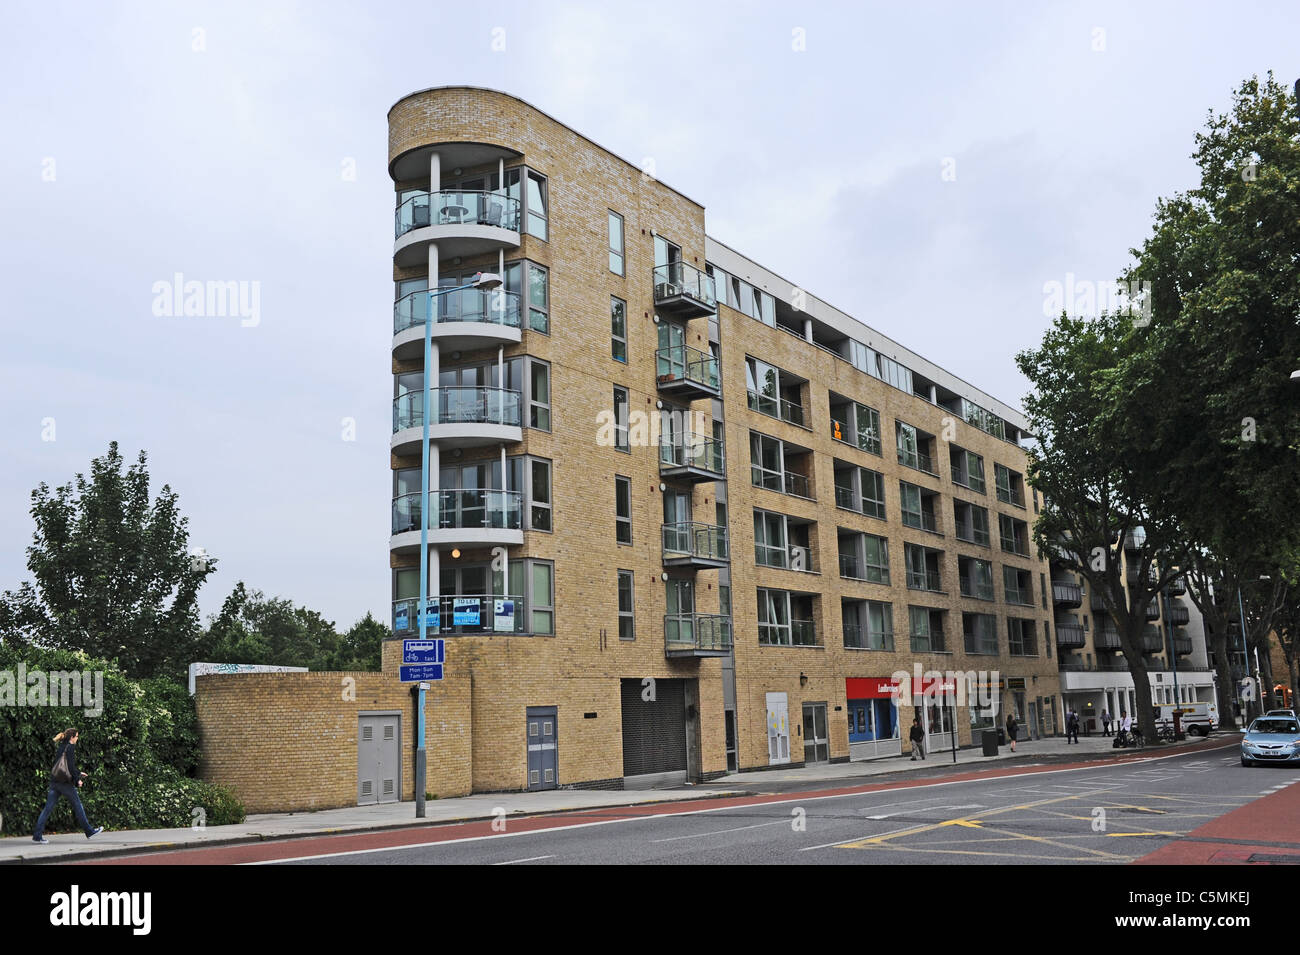 Modern design for flats appartments and shops in Chiswick High Road West London UK Stock Photo